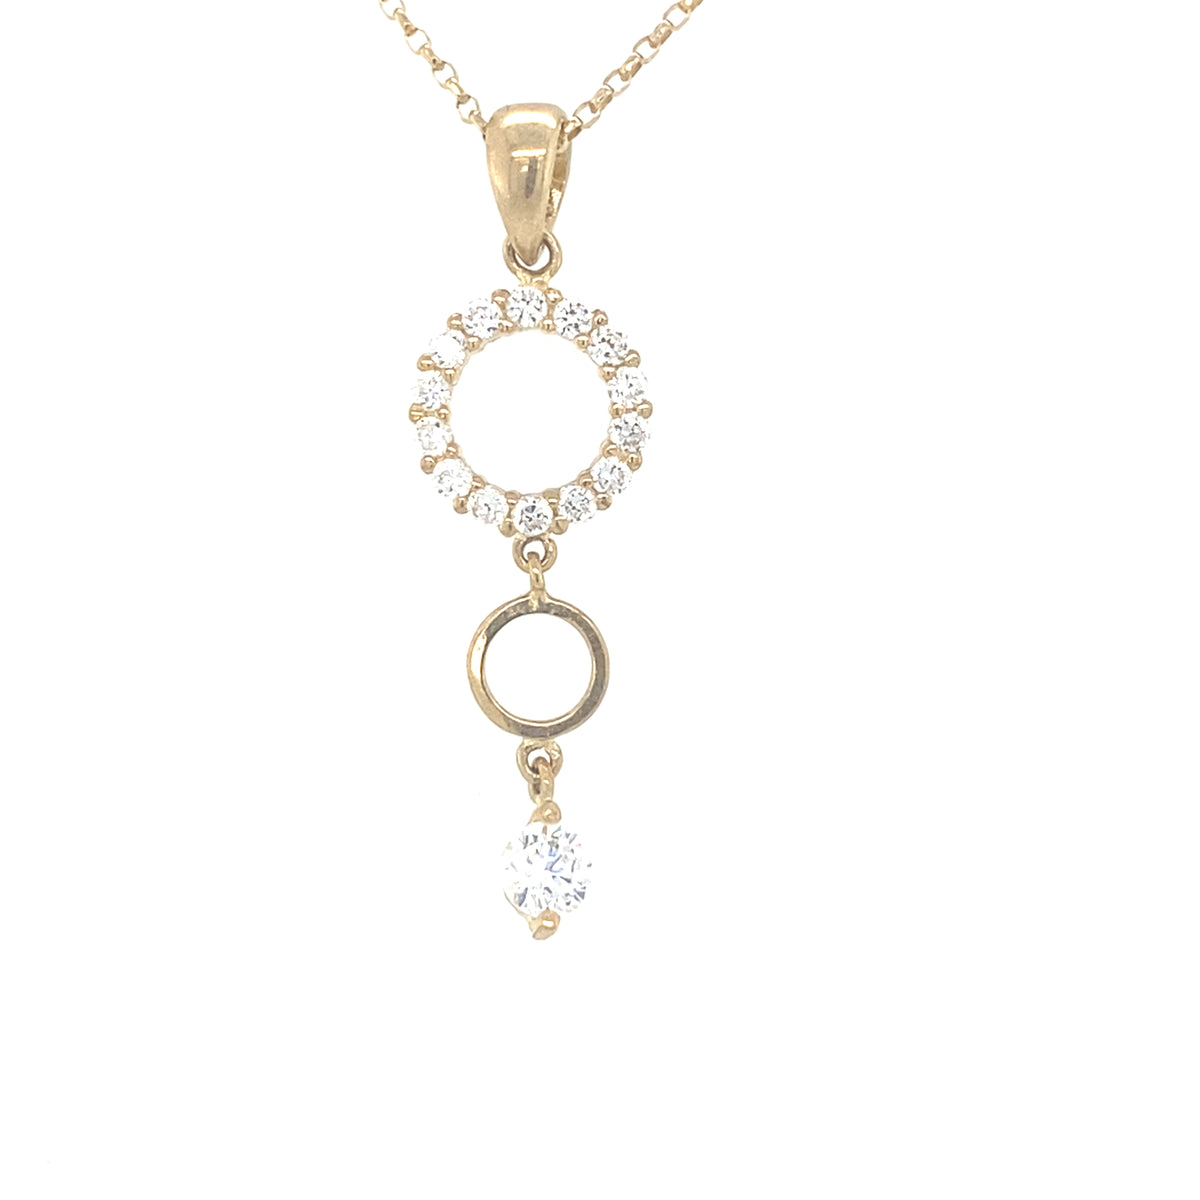 9kt Gold Drop Pendant with Clear Stone